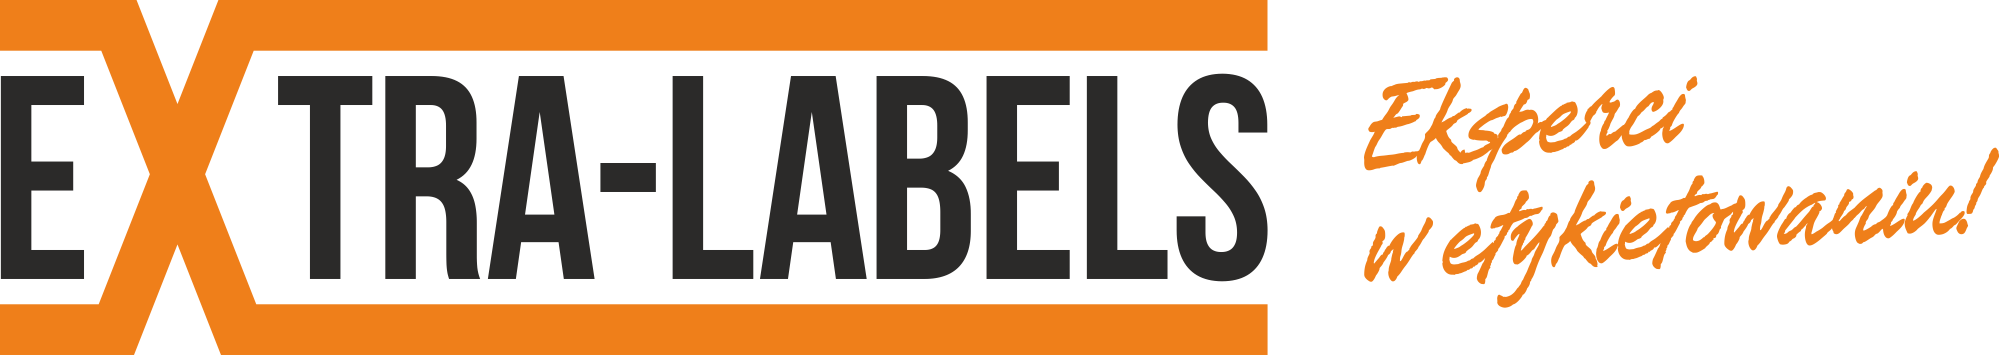 logo EXTRA-LABELS labeling experts